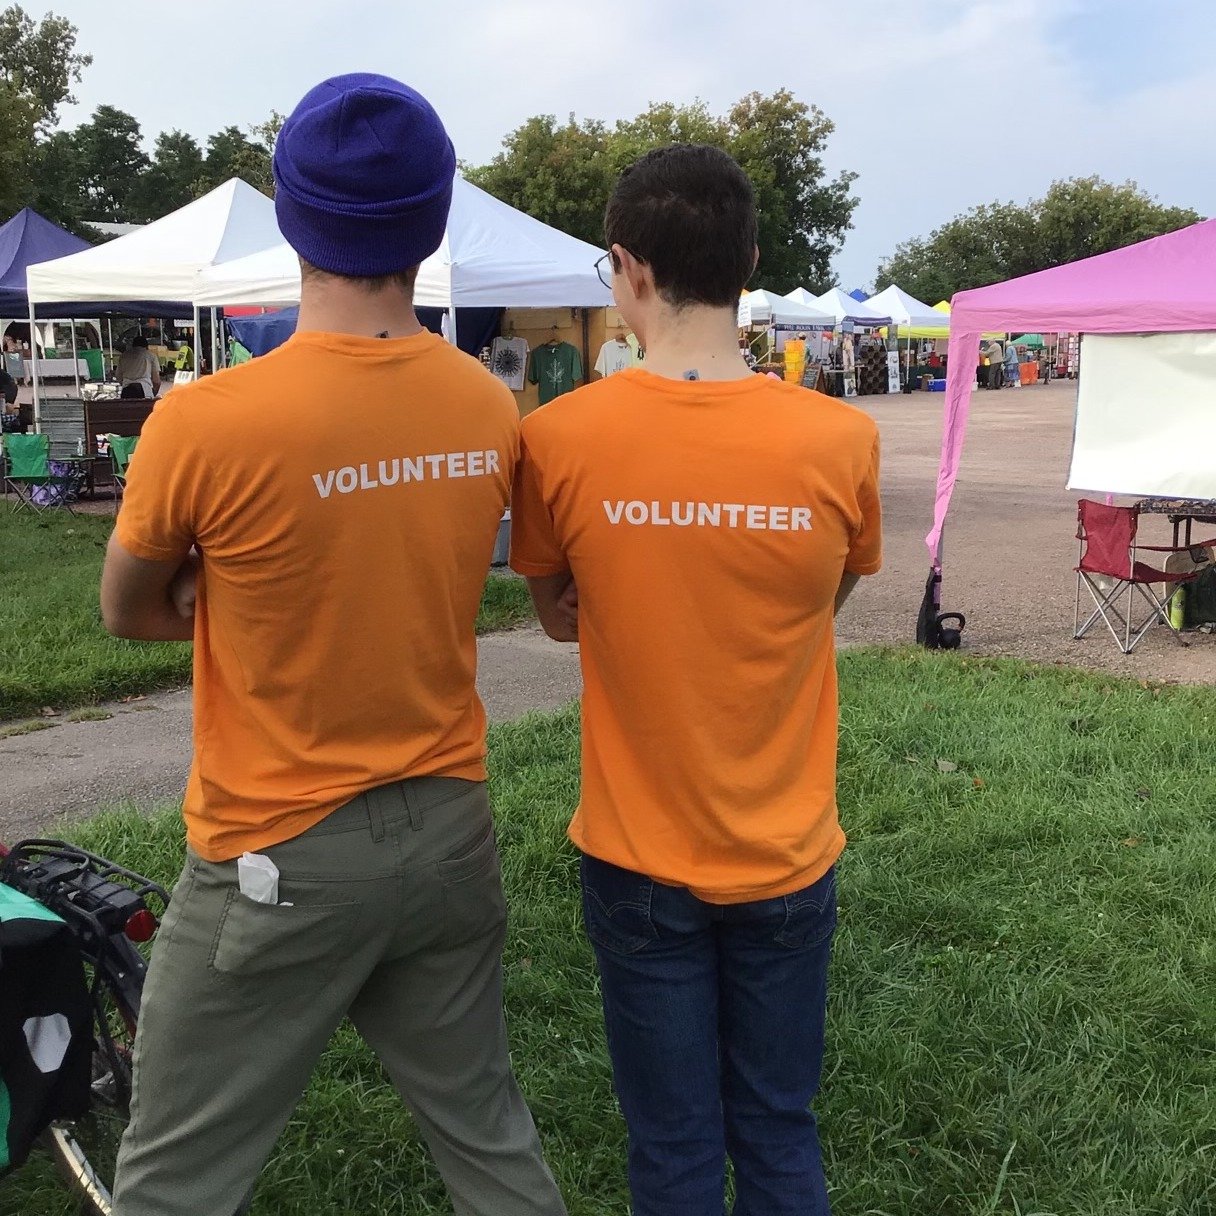 Just THREE days to Opening Day! 

We are so grateful to our volunteers over the years who have played a huge part in the smooth running of the market. Would you like to get involved? Check out volunteer opportunities and sign up for the shift at the 